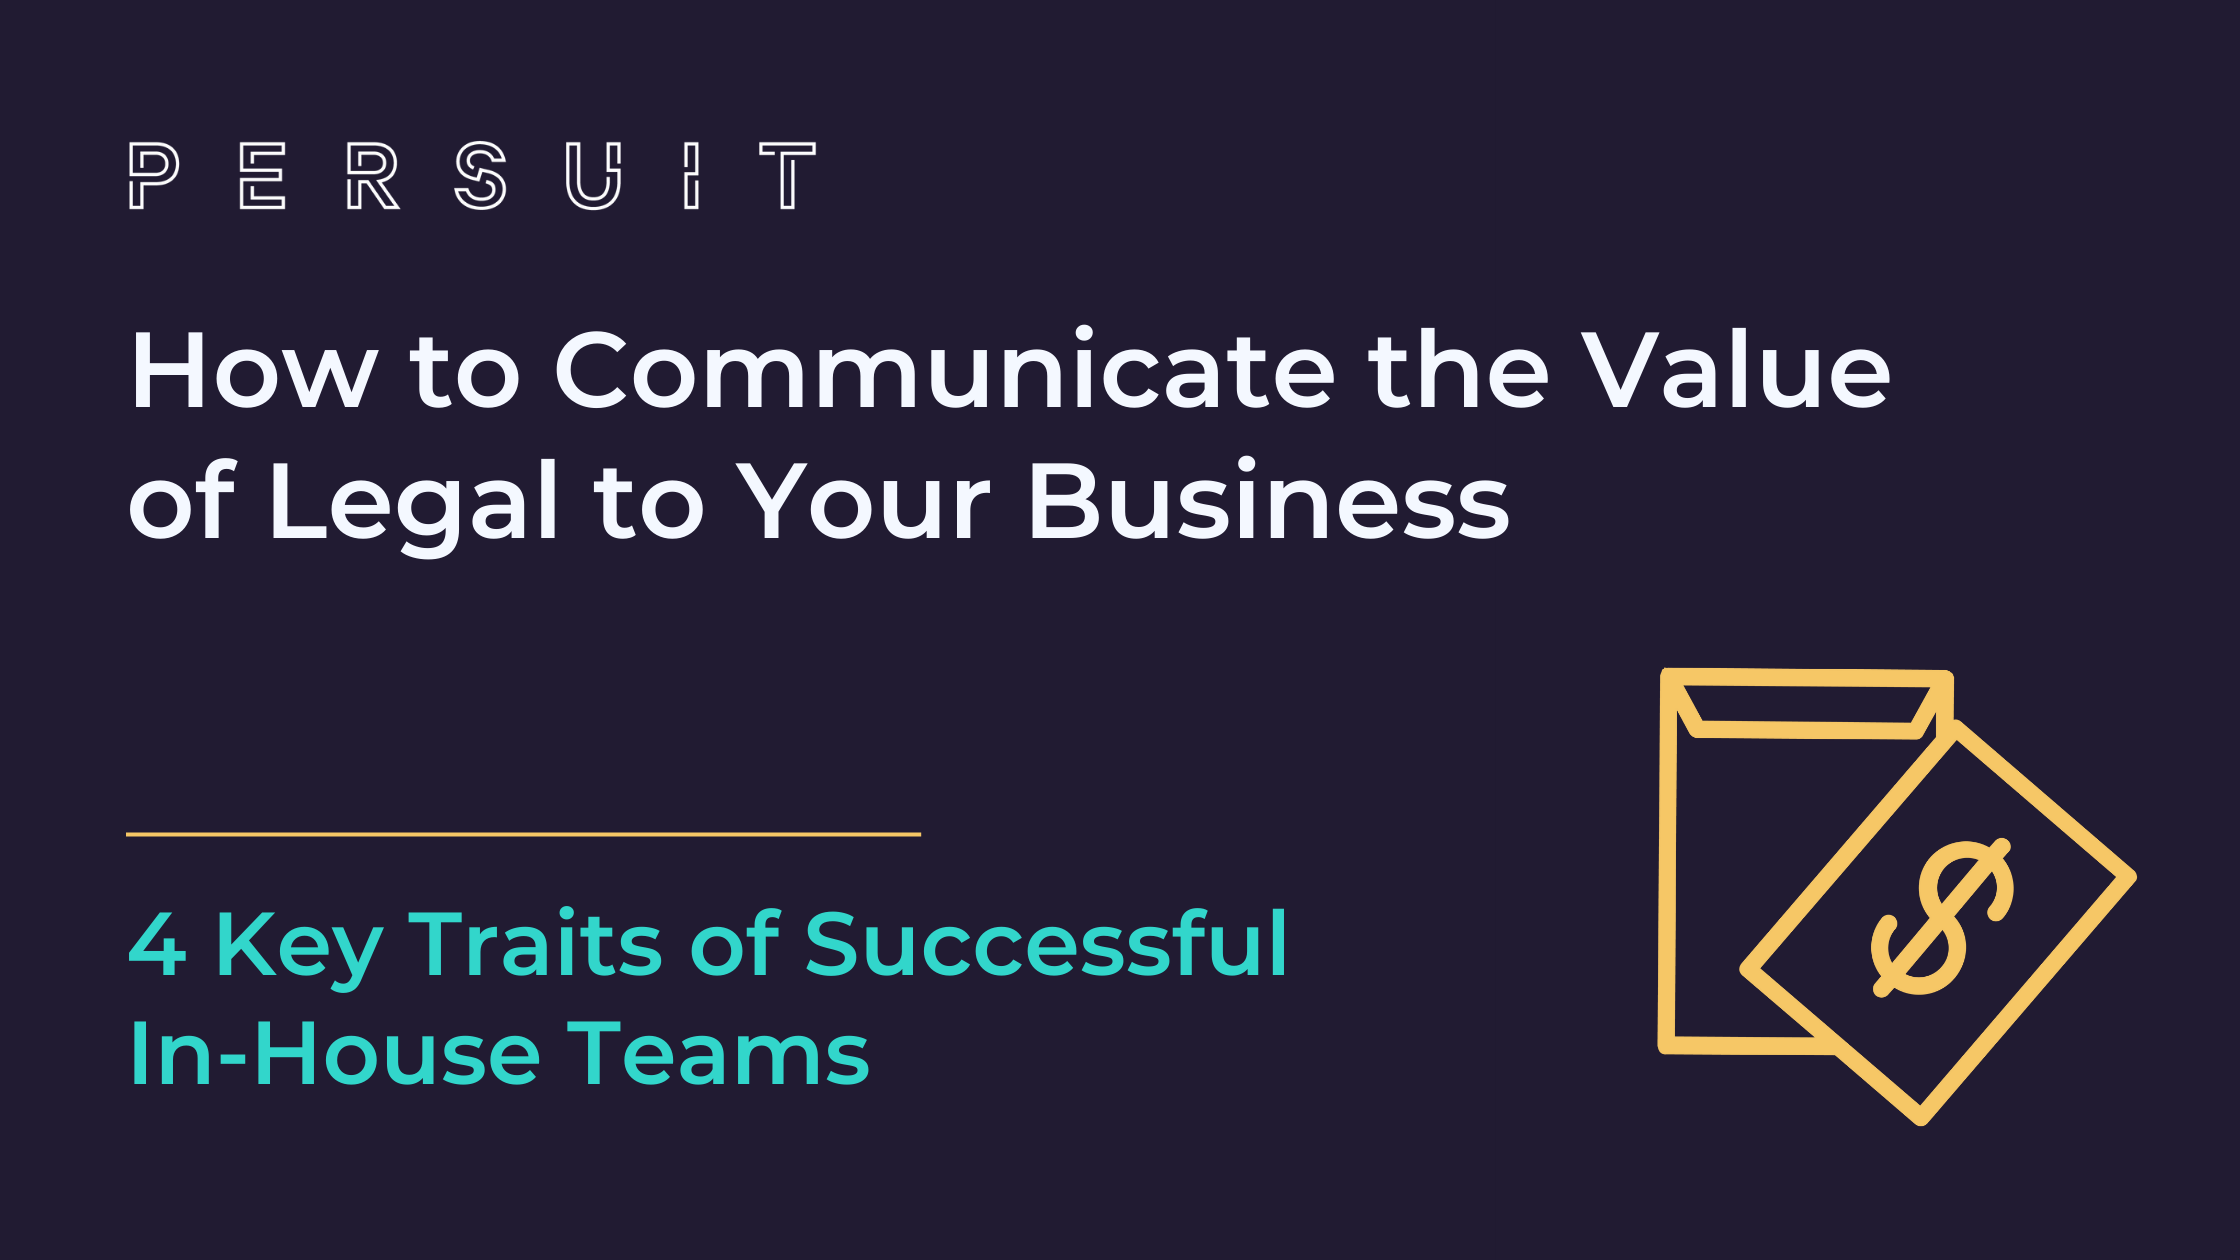 How to Communicate the Value of Legal to Your Business: 4 Key Traits of Successful In-House Teams